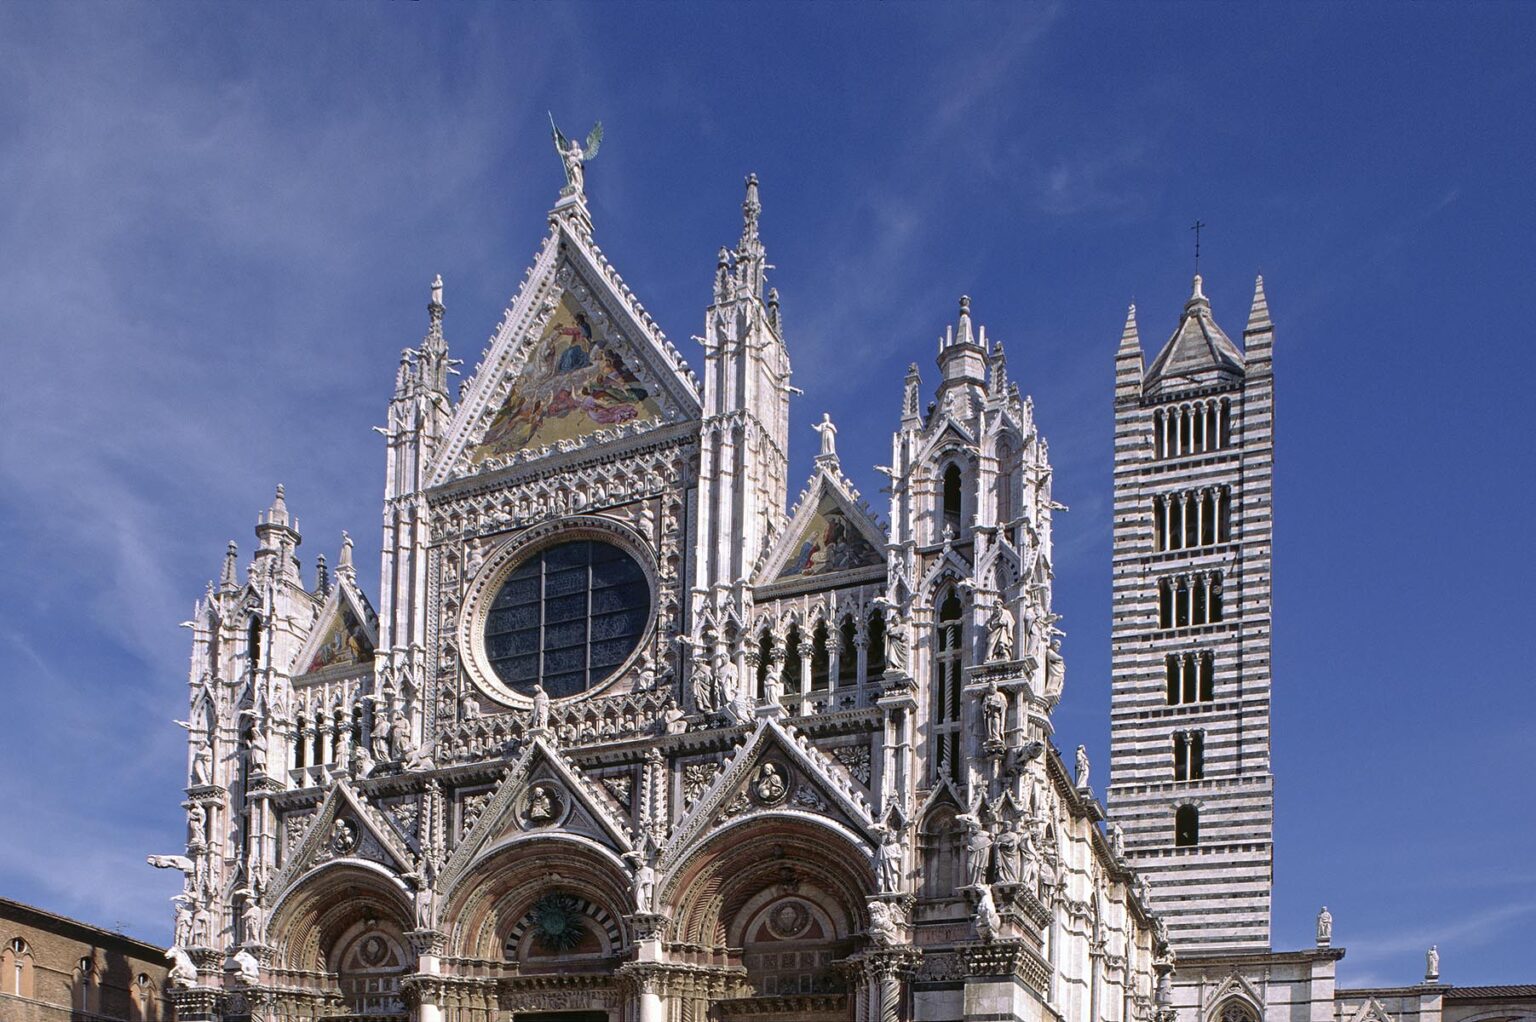 SIENA'S CATHEDRAL (Duomo) is the earliest of the TUSCAN GOTHIC Churches with construction starting in 1196 - TUSCANY, ITALY